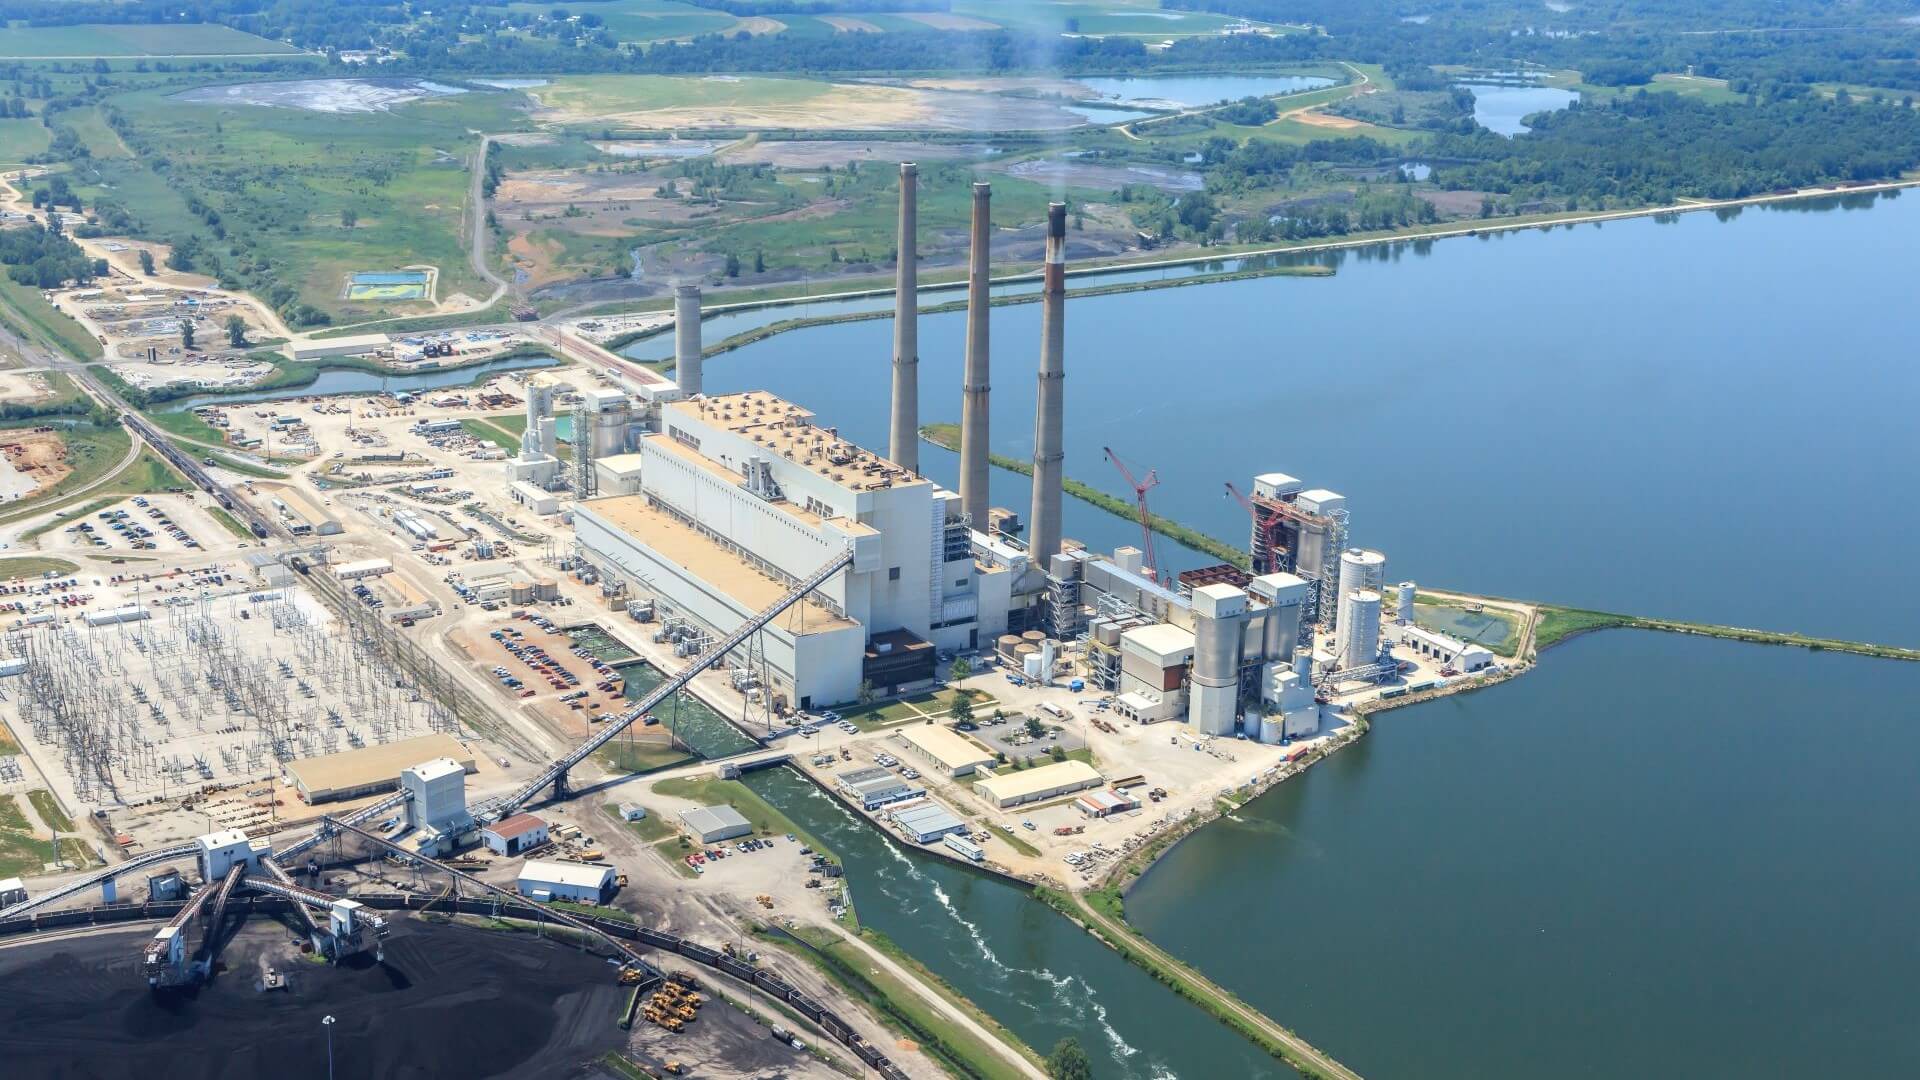 Aerial view over coal fired power station